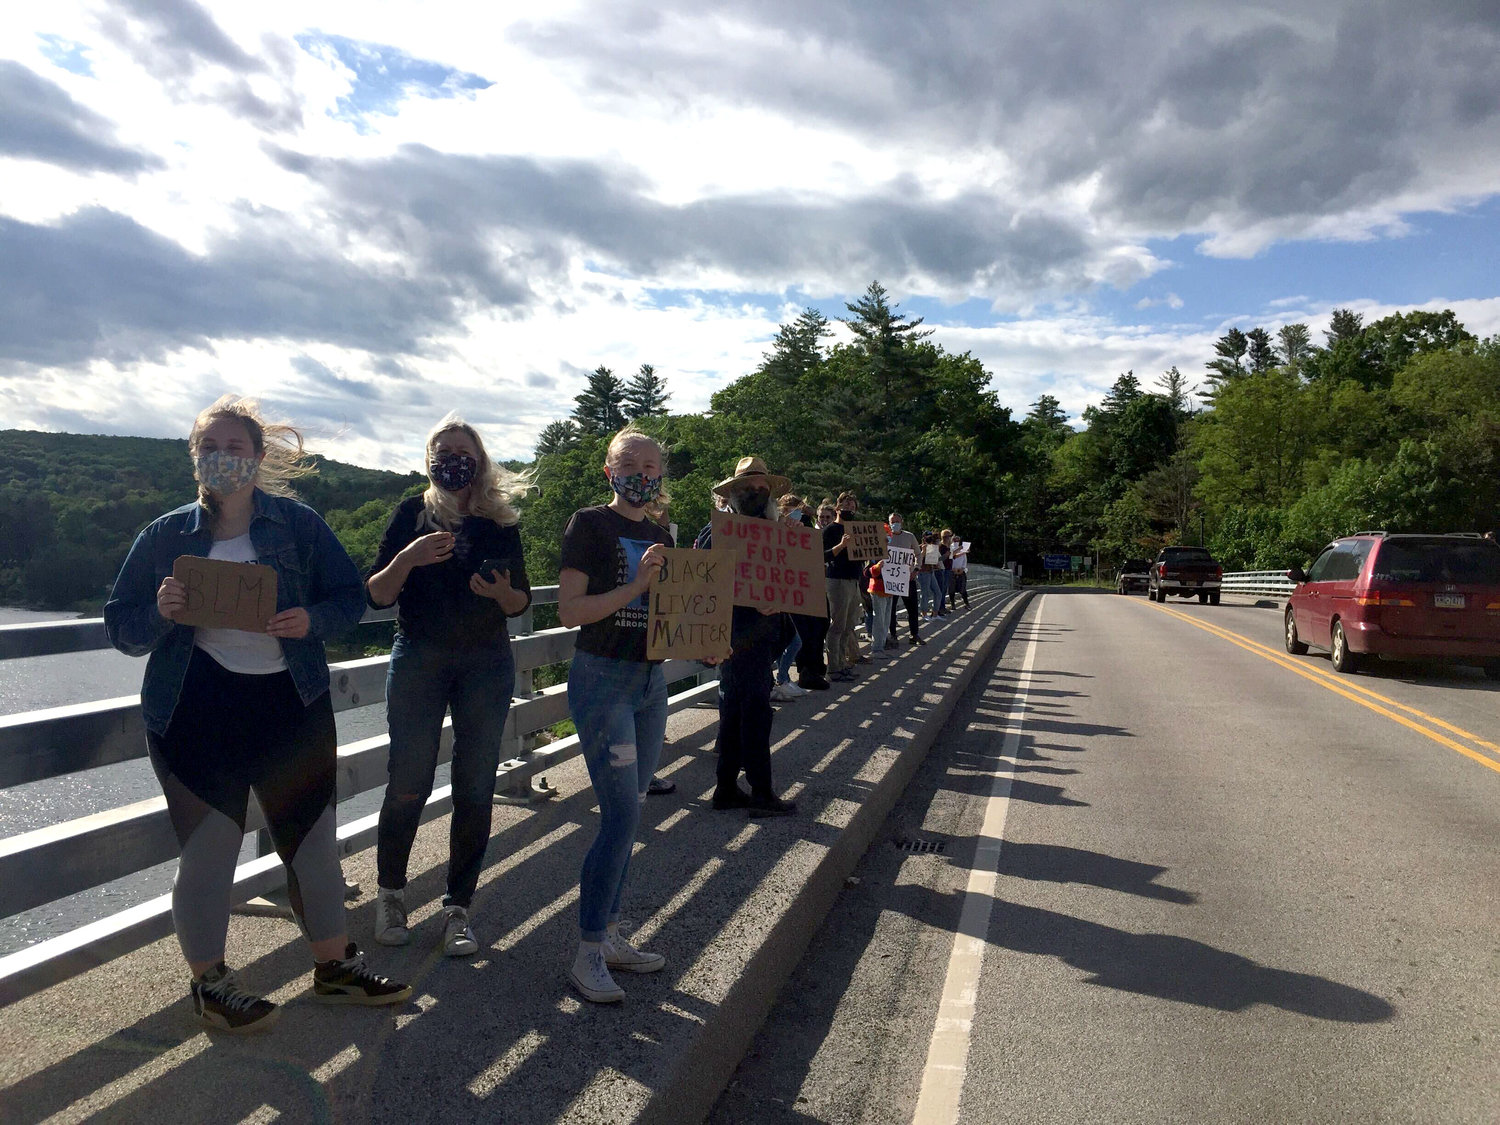 Over 50 people gathered on the Narrowsburg bridge at 5 pm to demonstrate concern and solidarity for people of color who experience oppression in their daily lives.